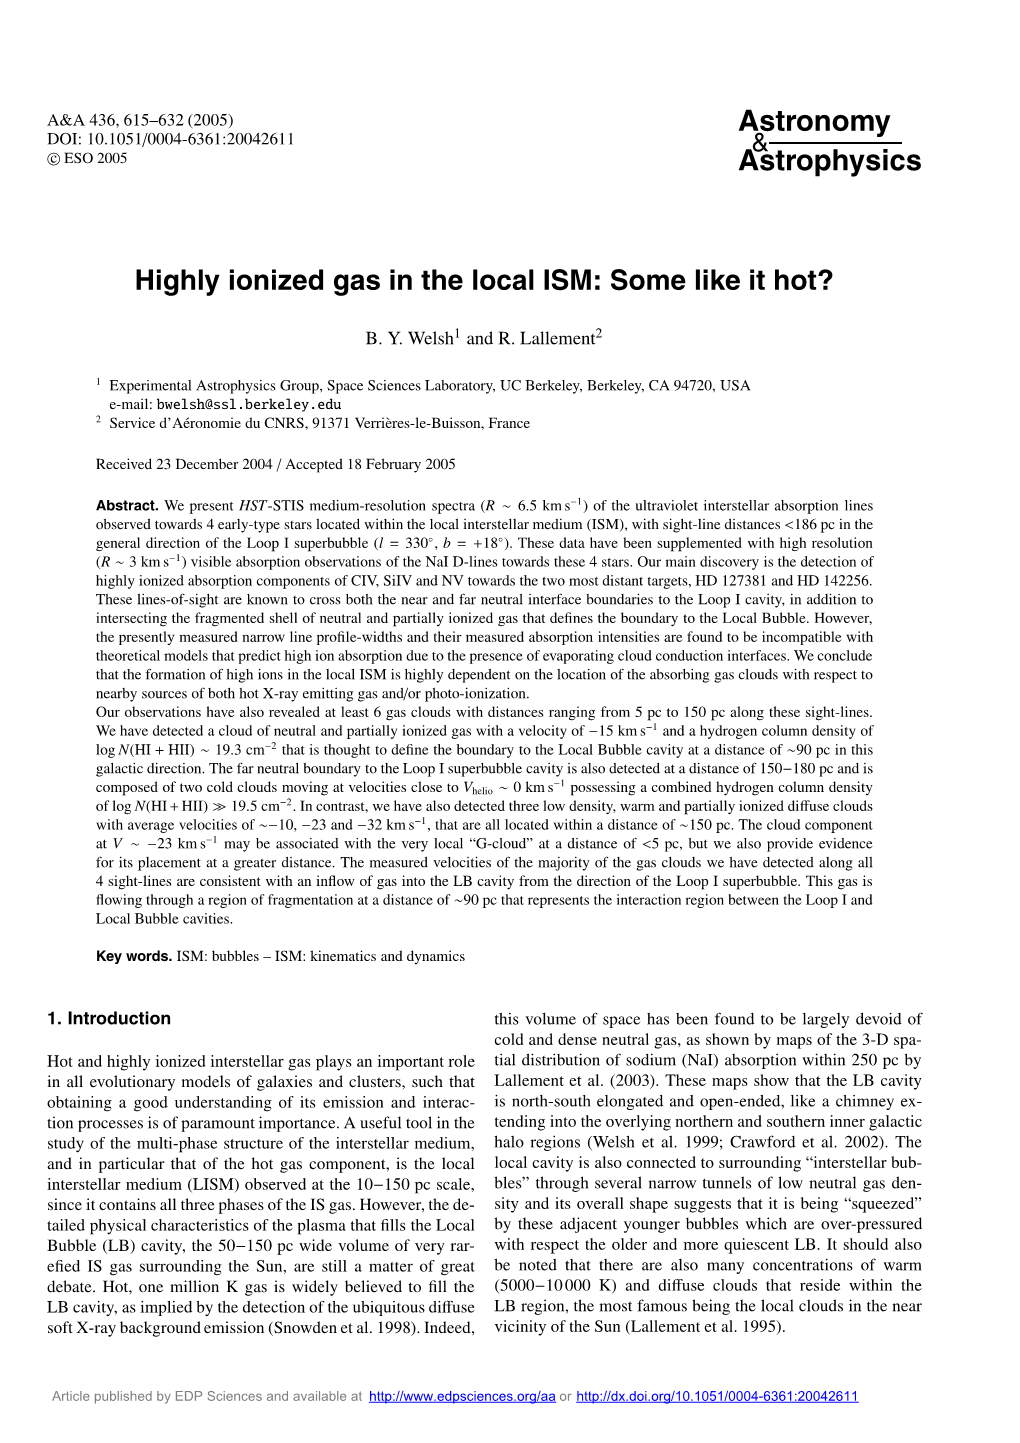 Highly Ionized Gas in the Local ISM: Some Like It Hot?